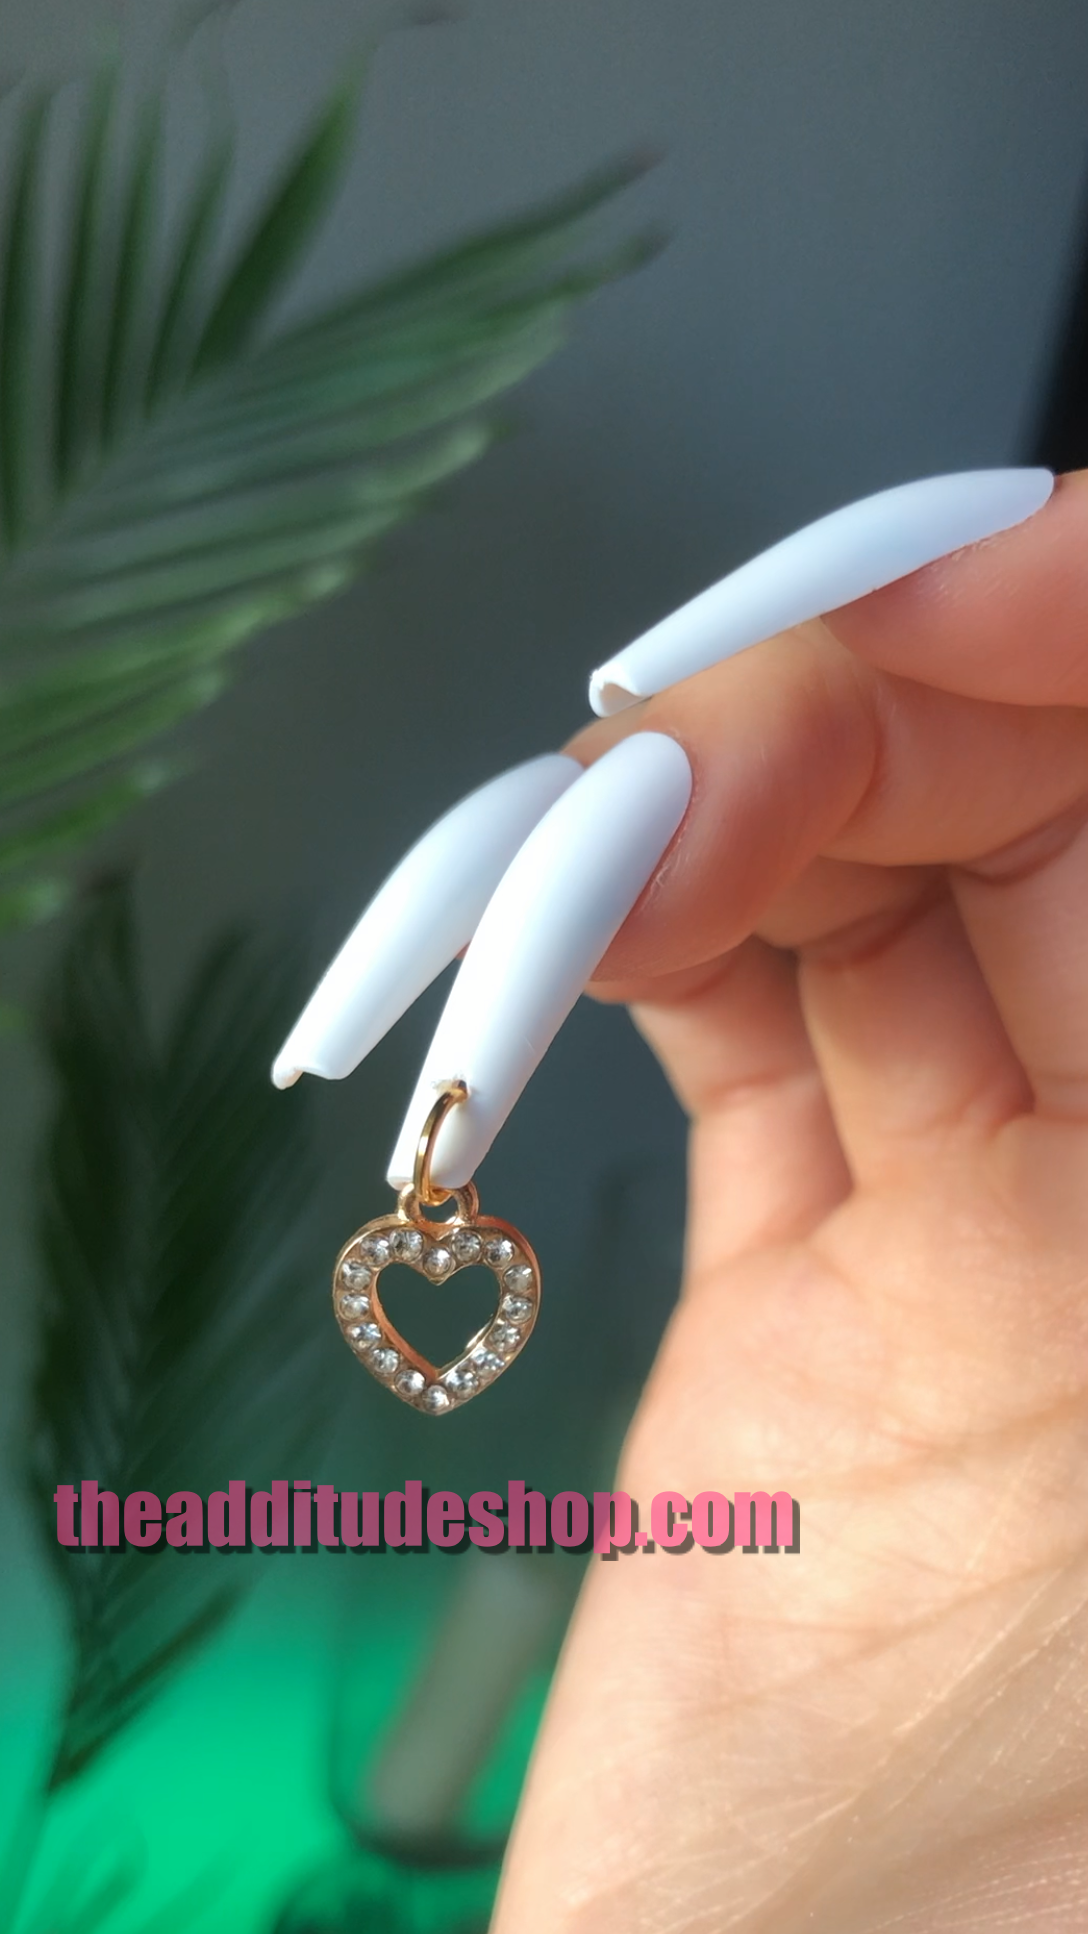 Valentine's Wings Nail Art 3D Charms – The Additude Shop